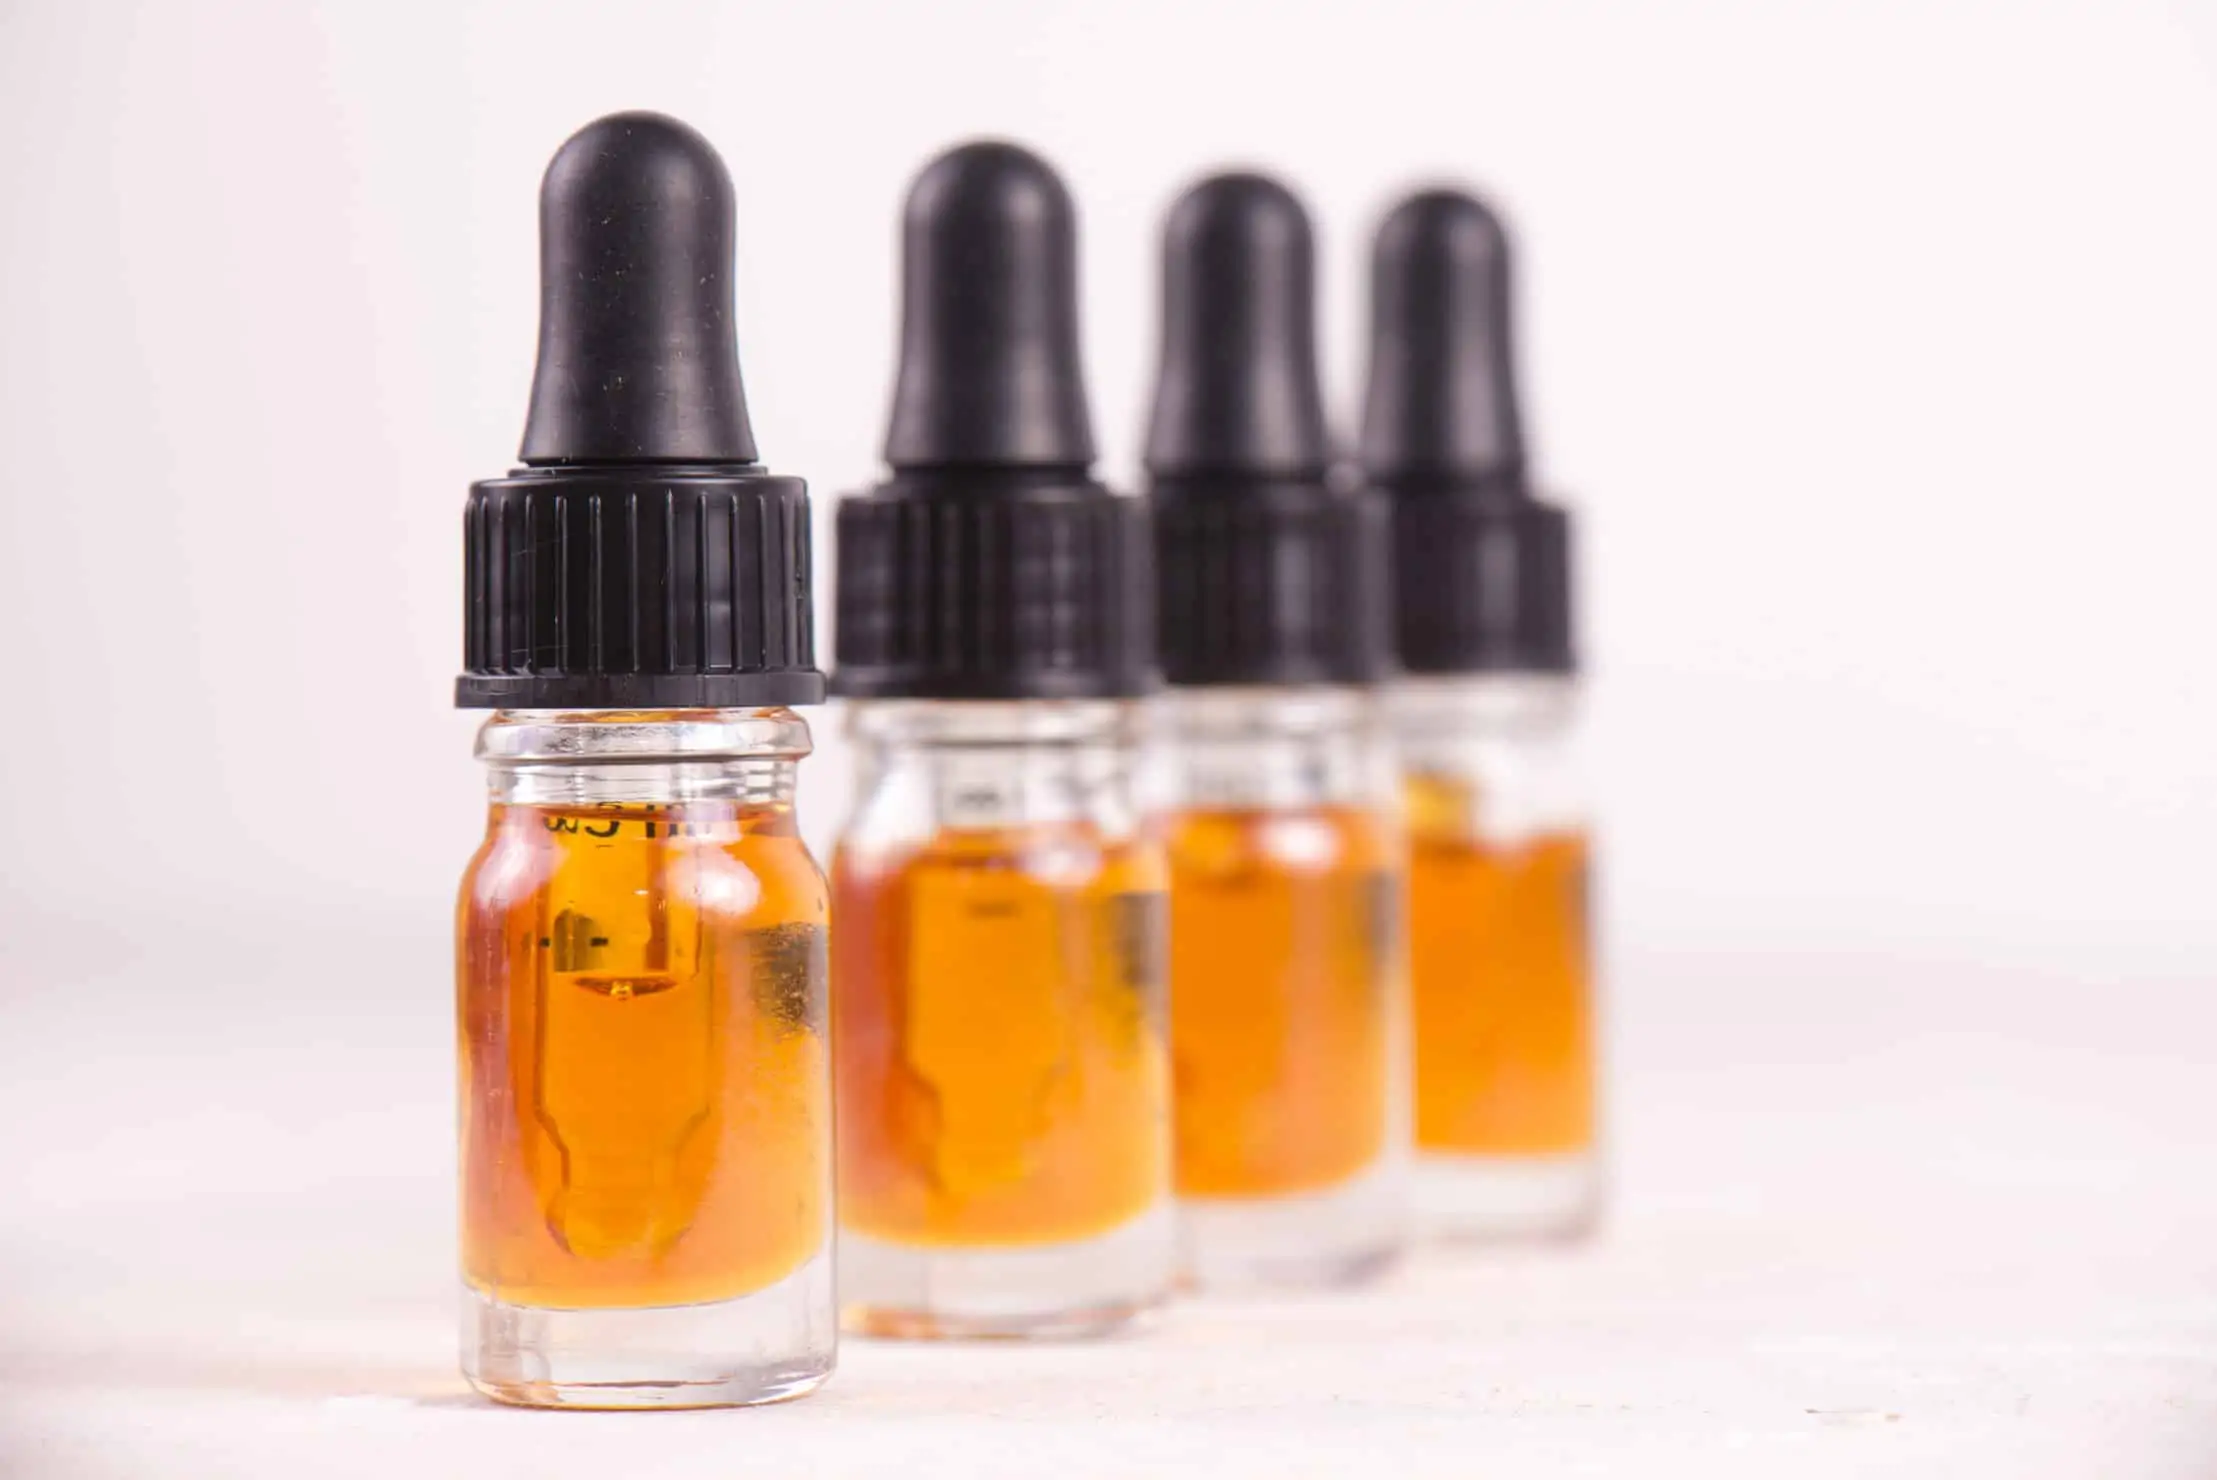 It's time for CBD products to not be legal. Four tinctures.